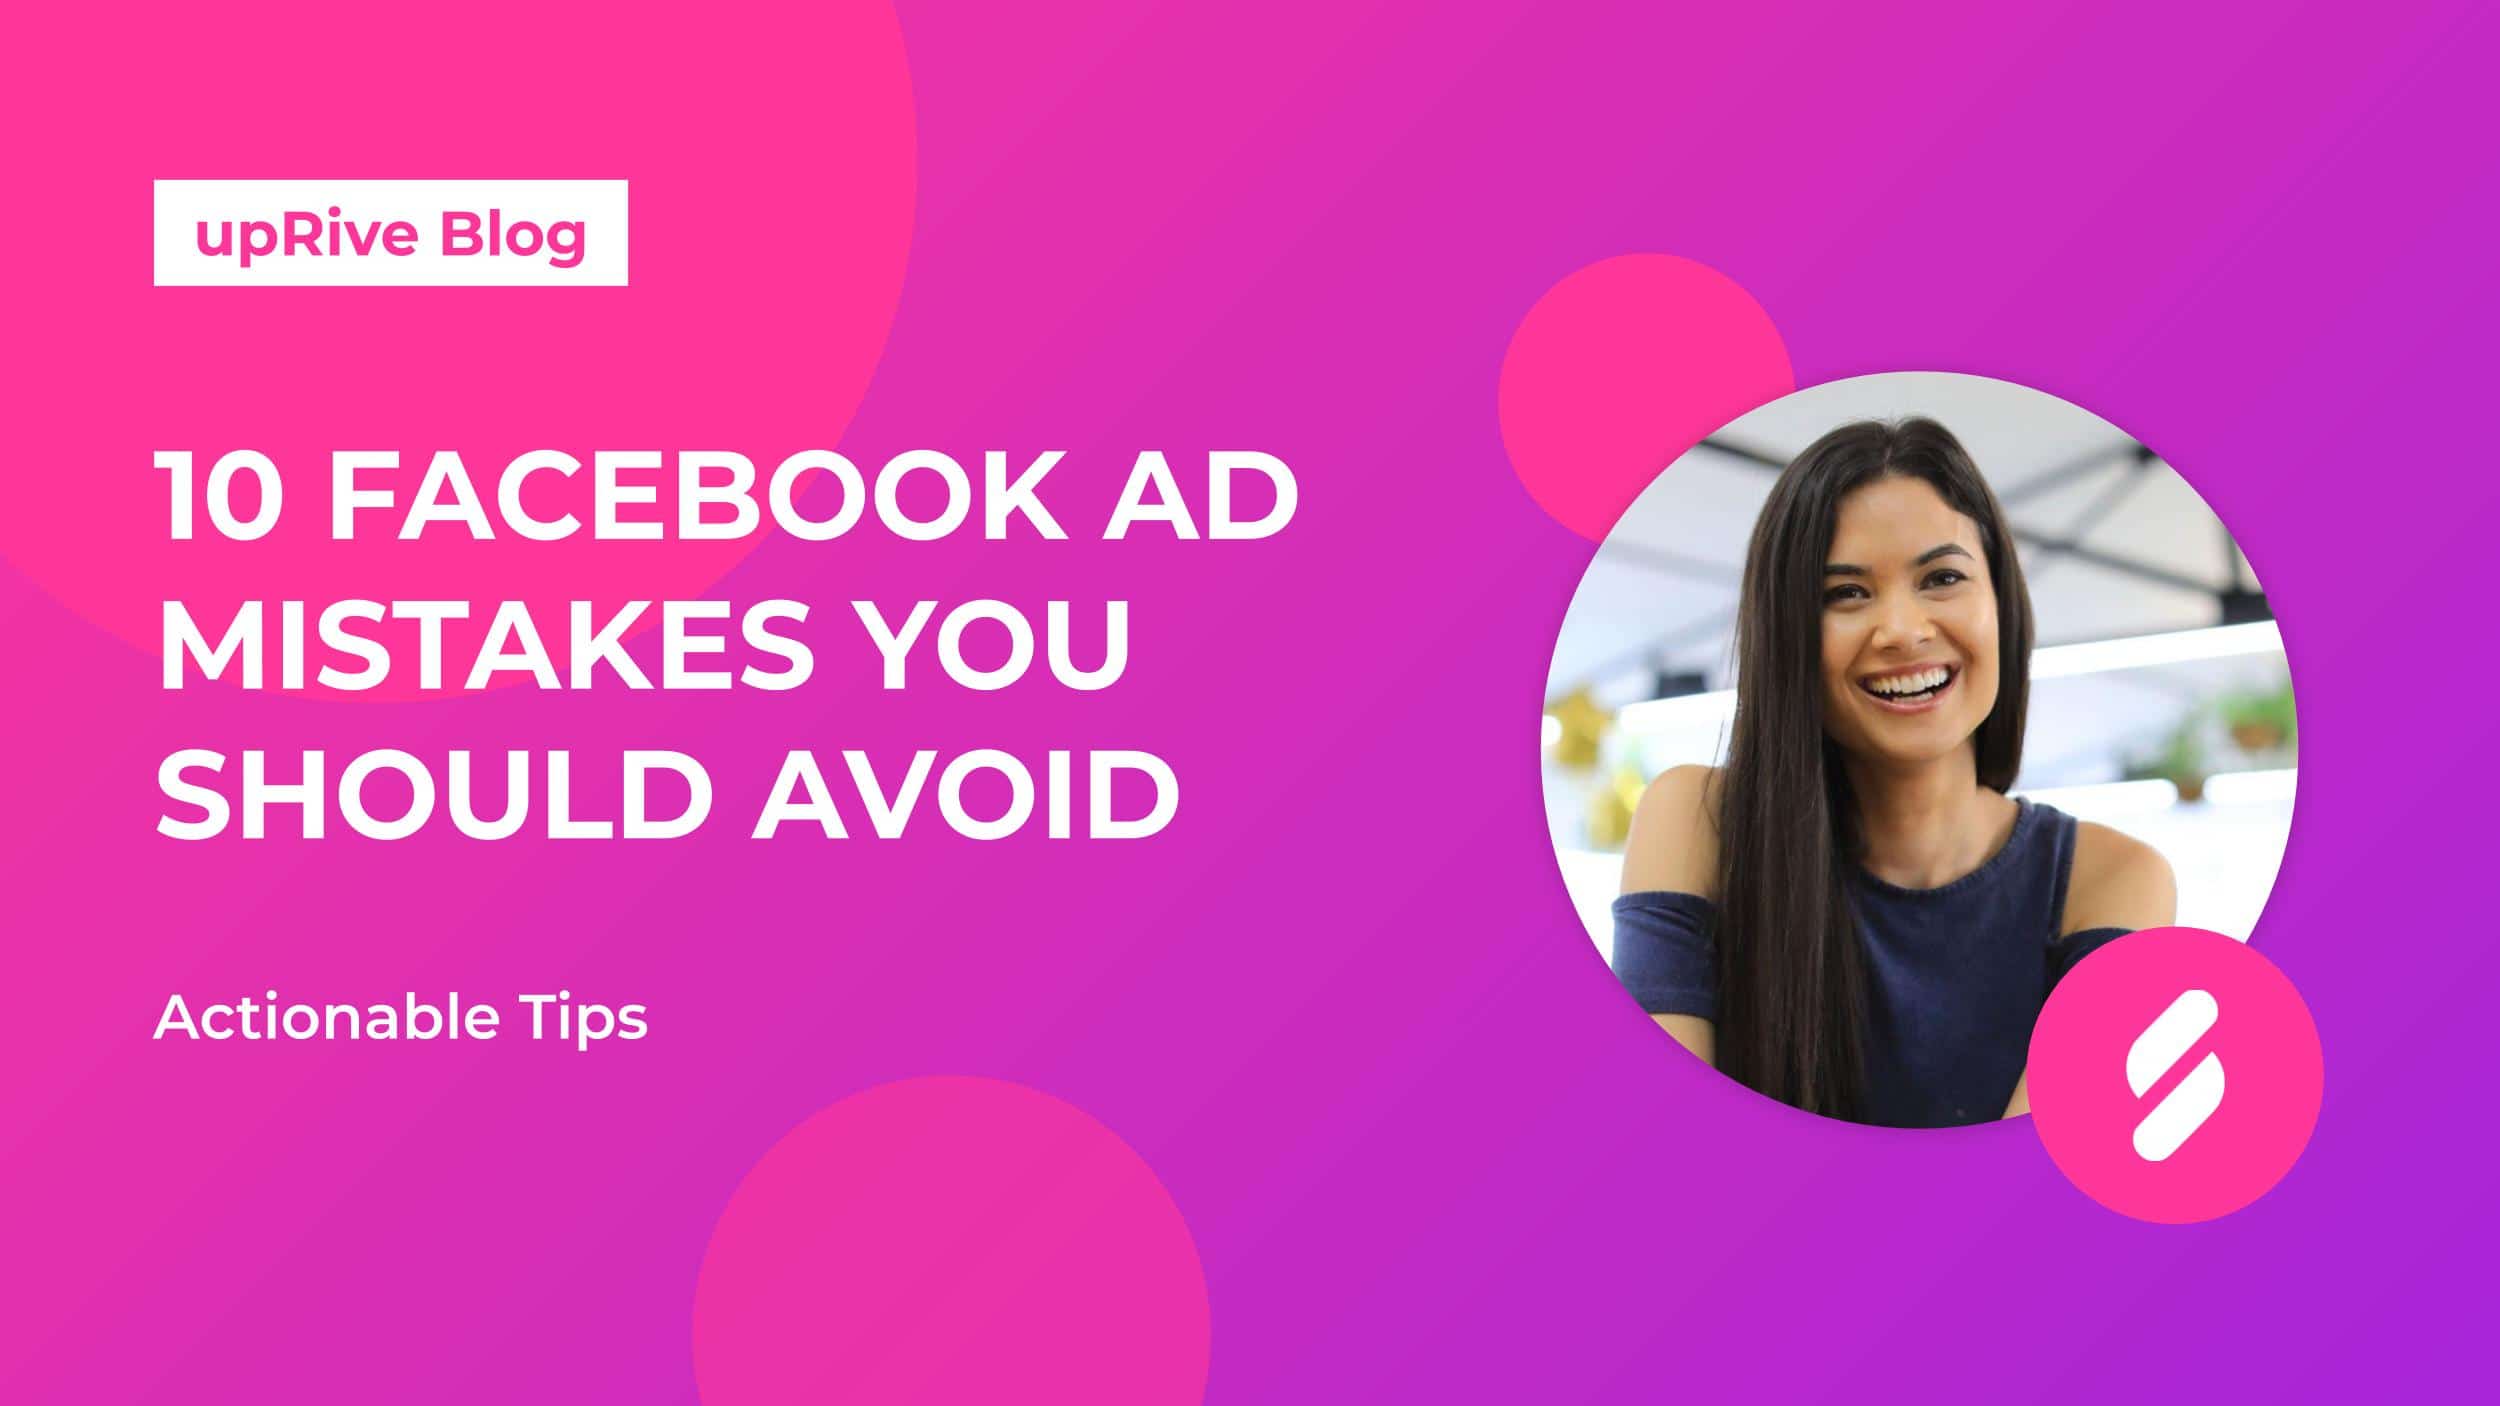 Avoid These Facebook Ad Mistakes